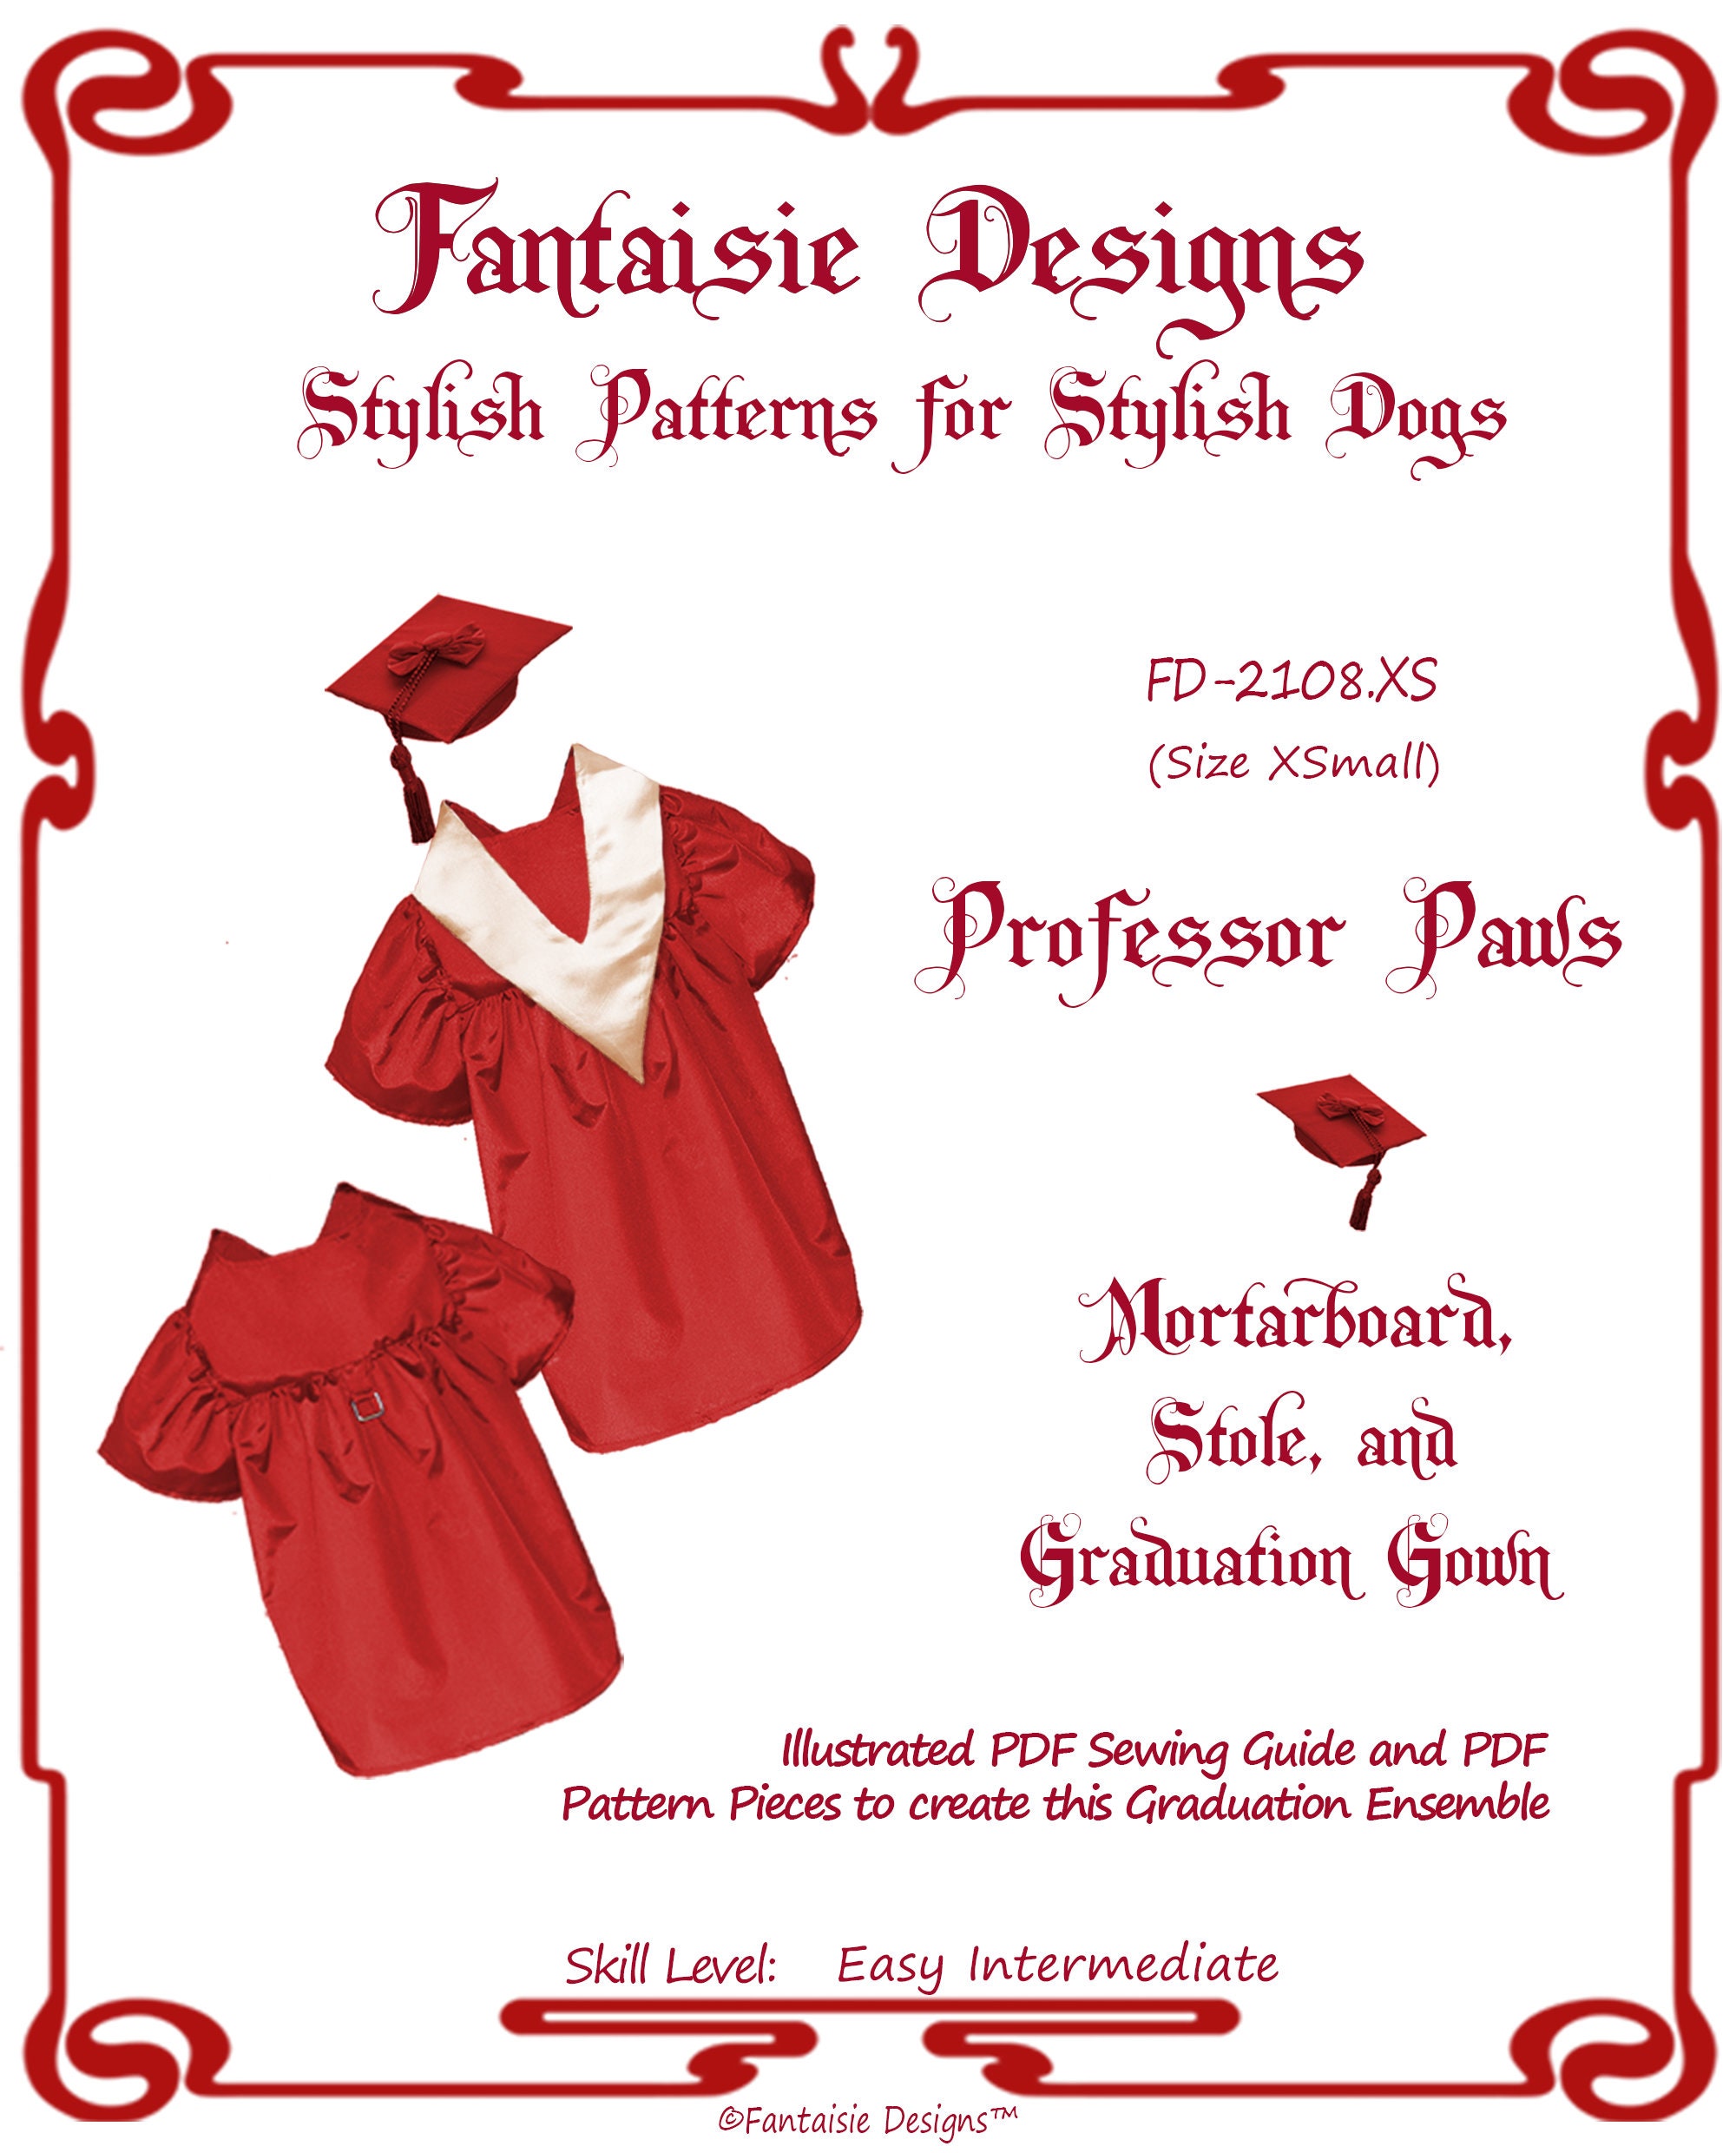 Professor Paws, FD-2108.XS,PDF Pet Graduation Gown, Stole & Mortarboard  Sewing Pattern Pieces and Guide,, Sz Xsmall, Pdf Instant Download - Etsy